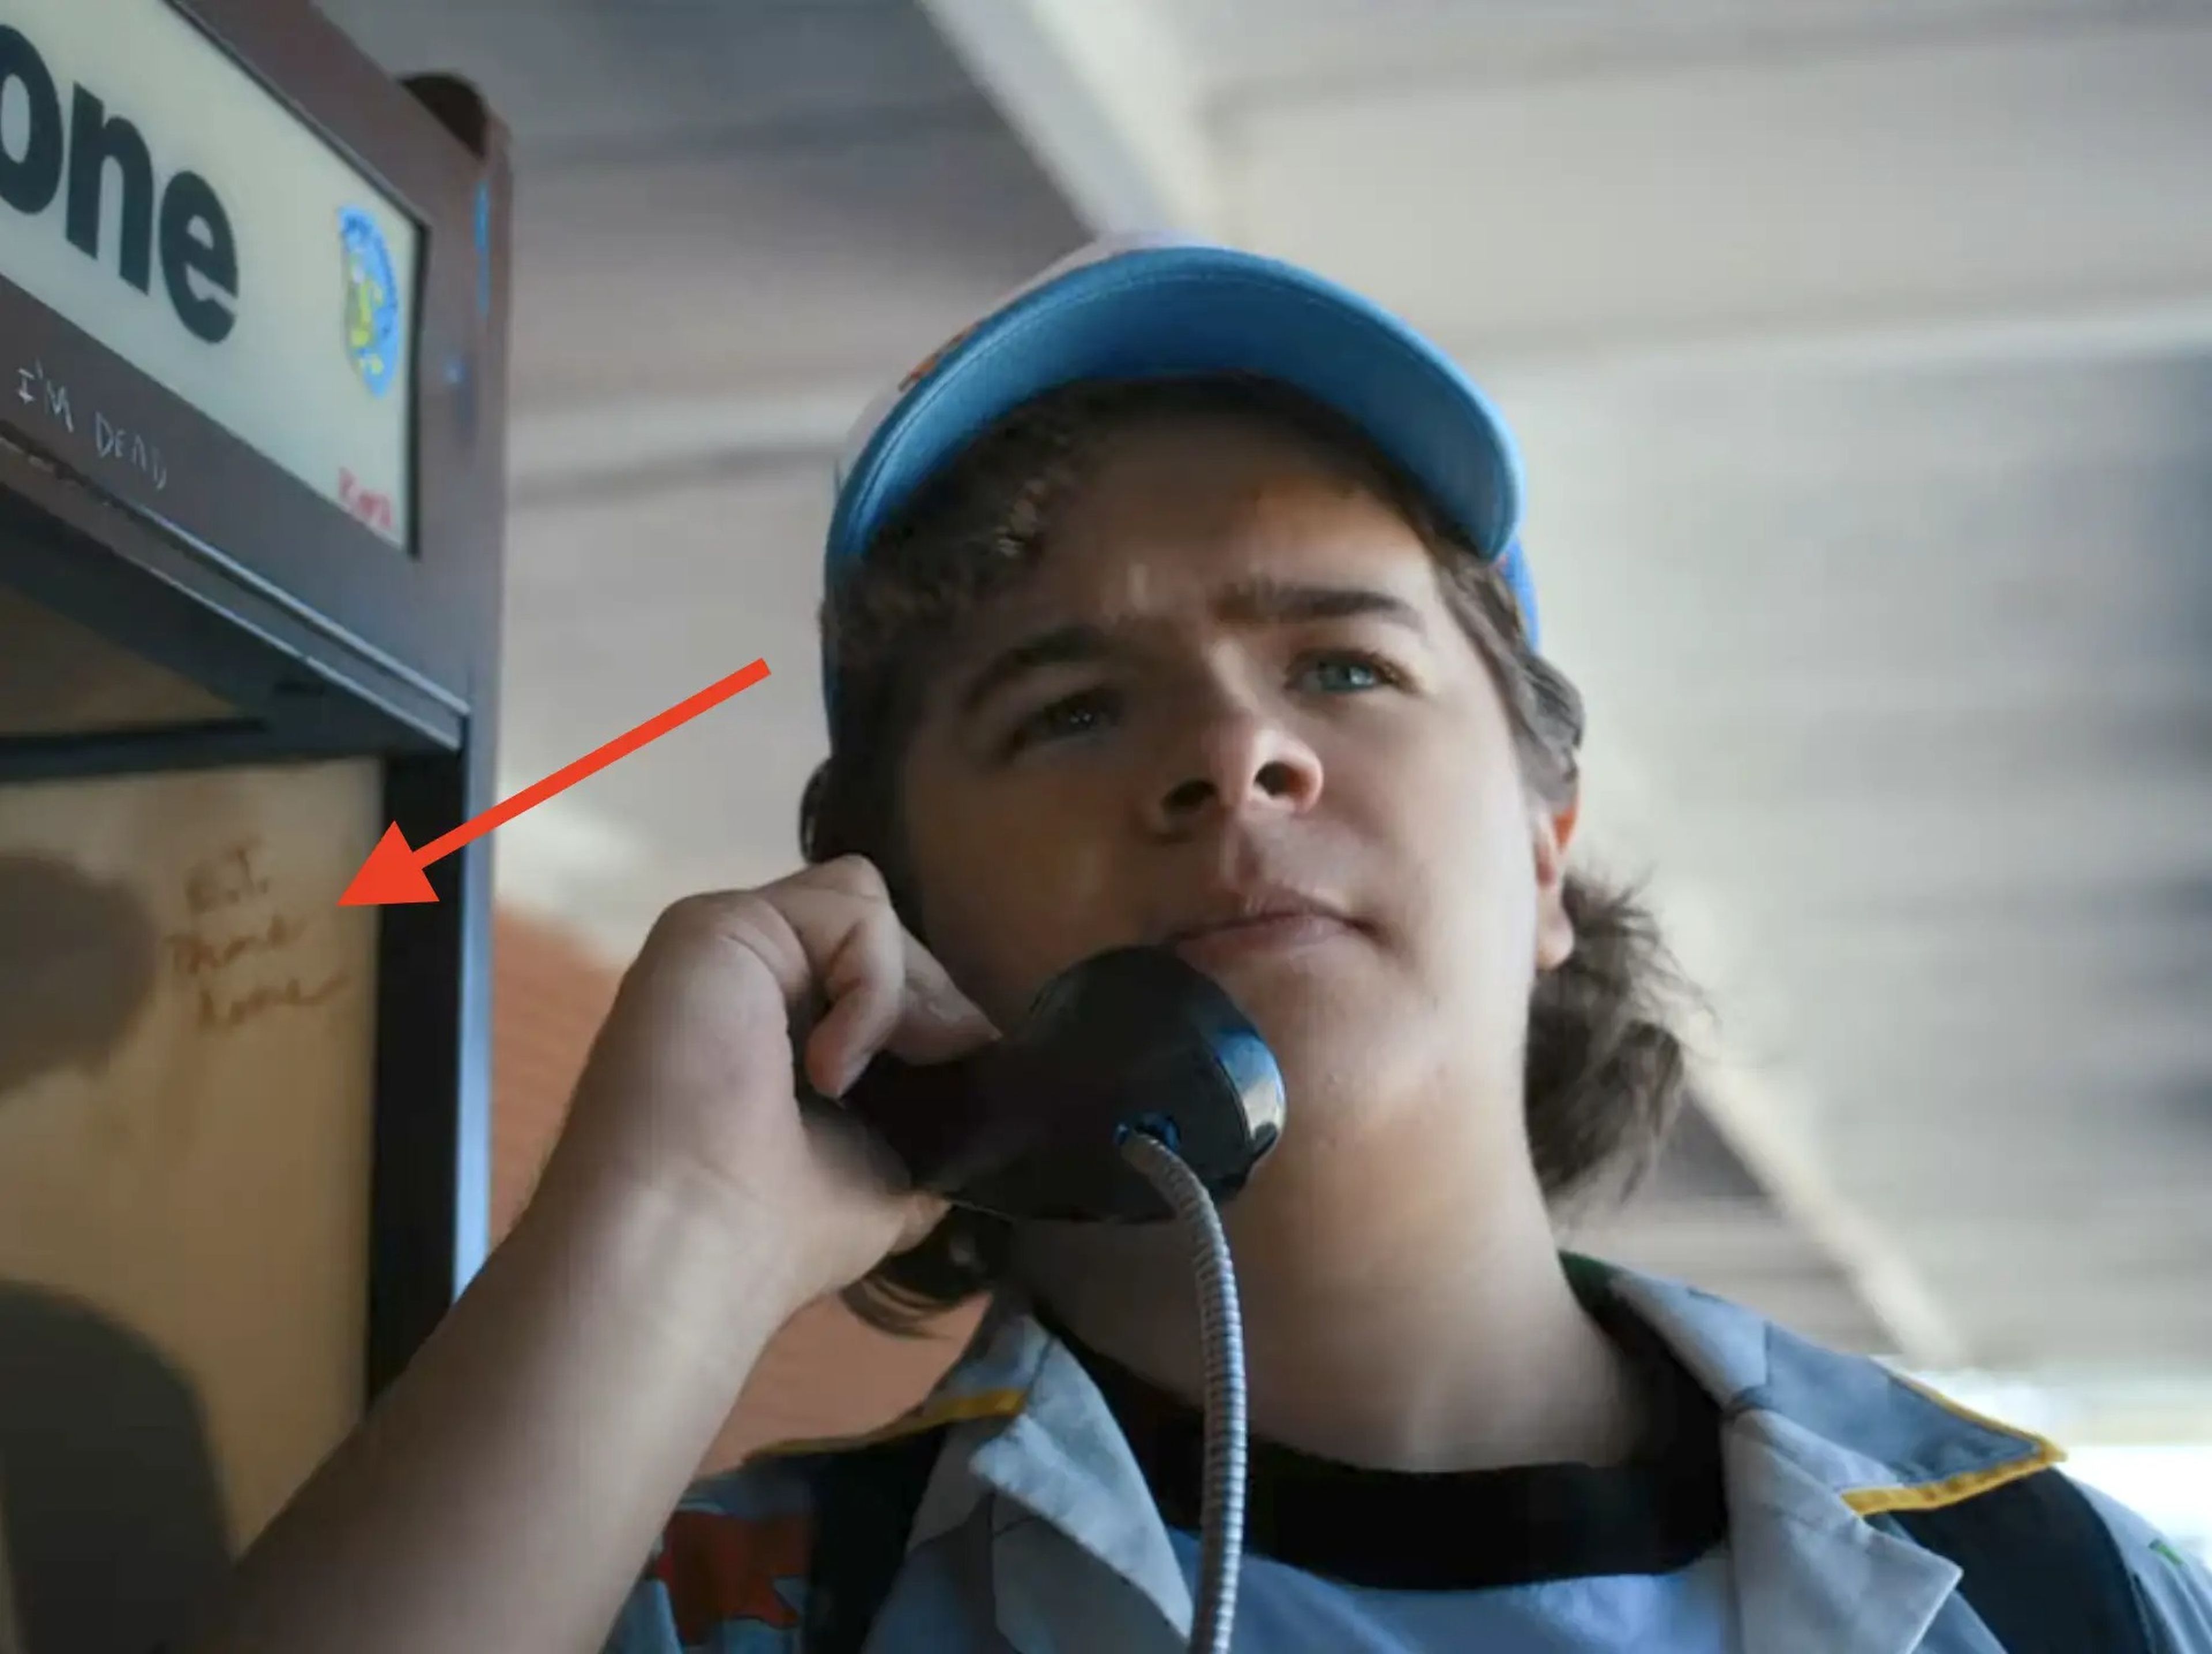 A scene from Netflix's sci-fi series "Stranger Things," showing Dustin on the payphone.